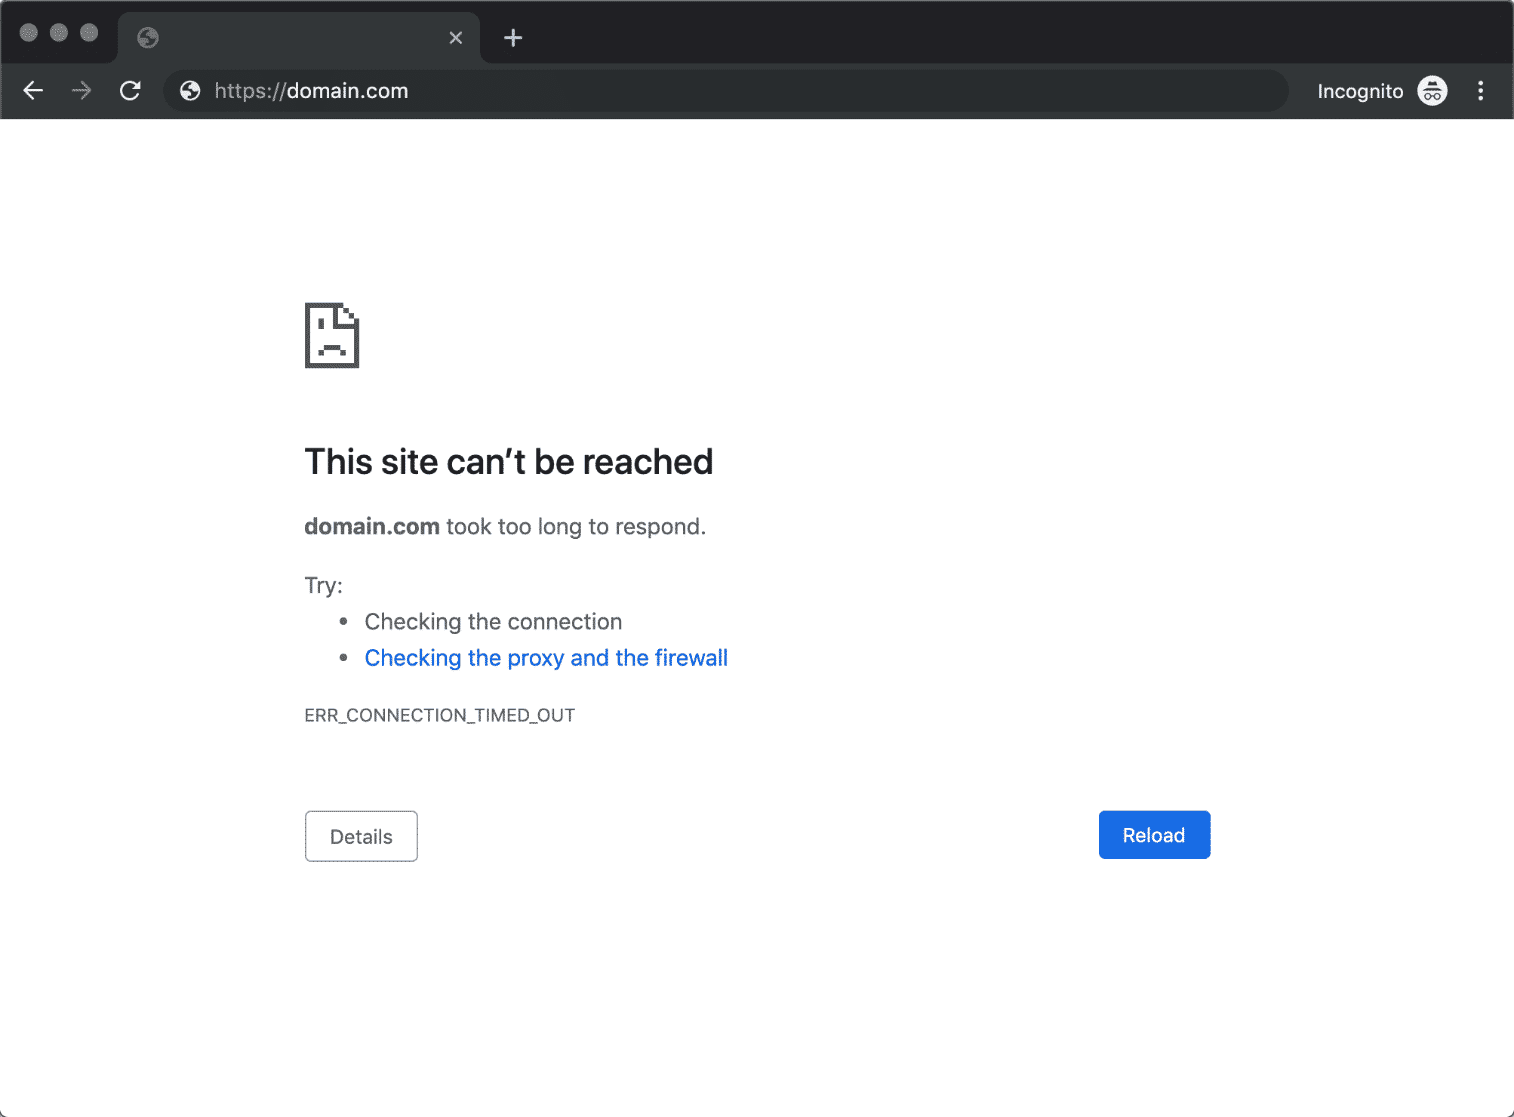 How-To Fix “This Site Can’t be Reached” in Chrome and Edge